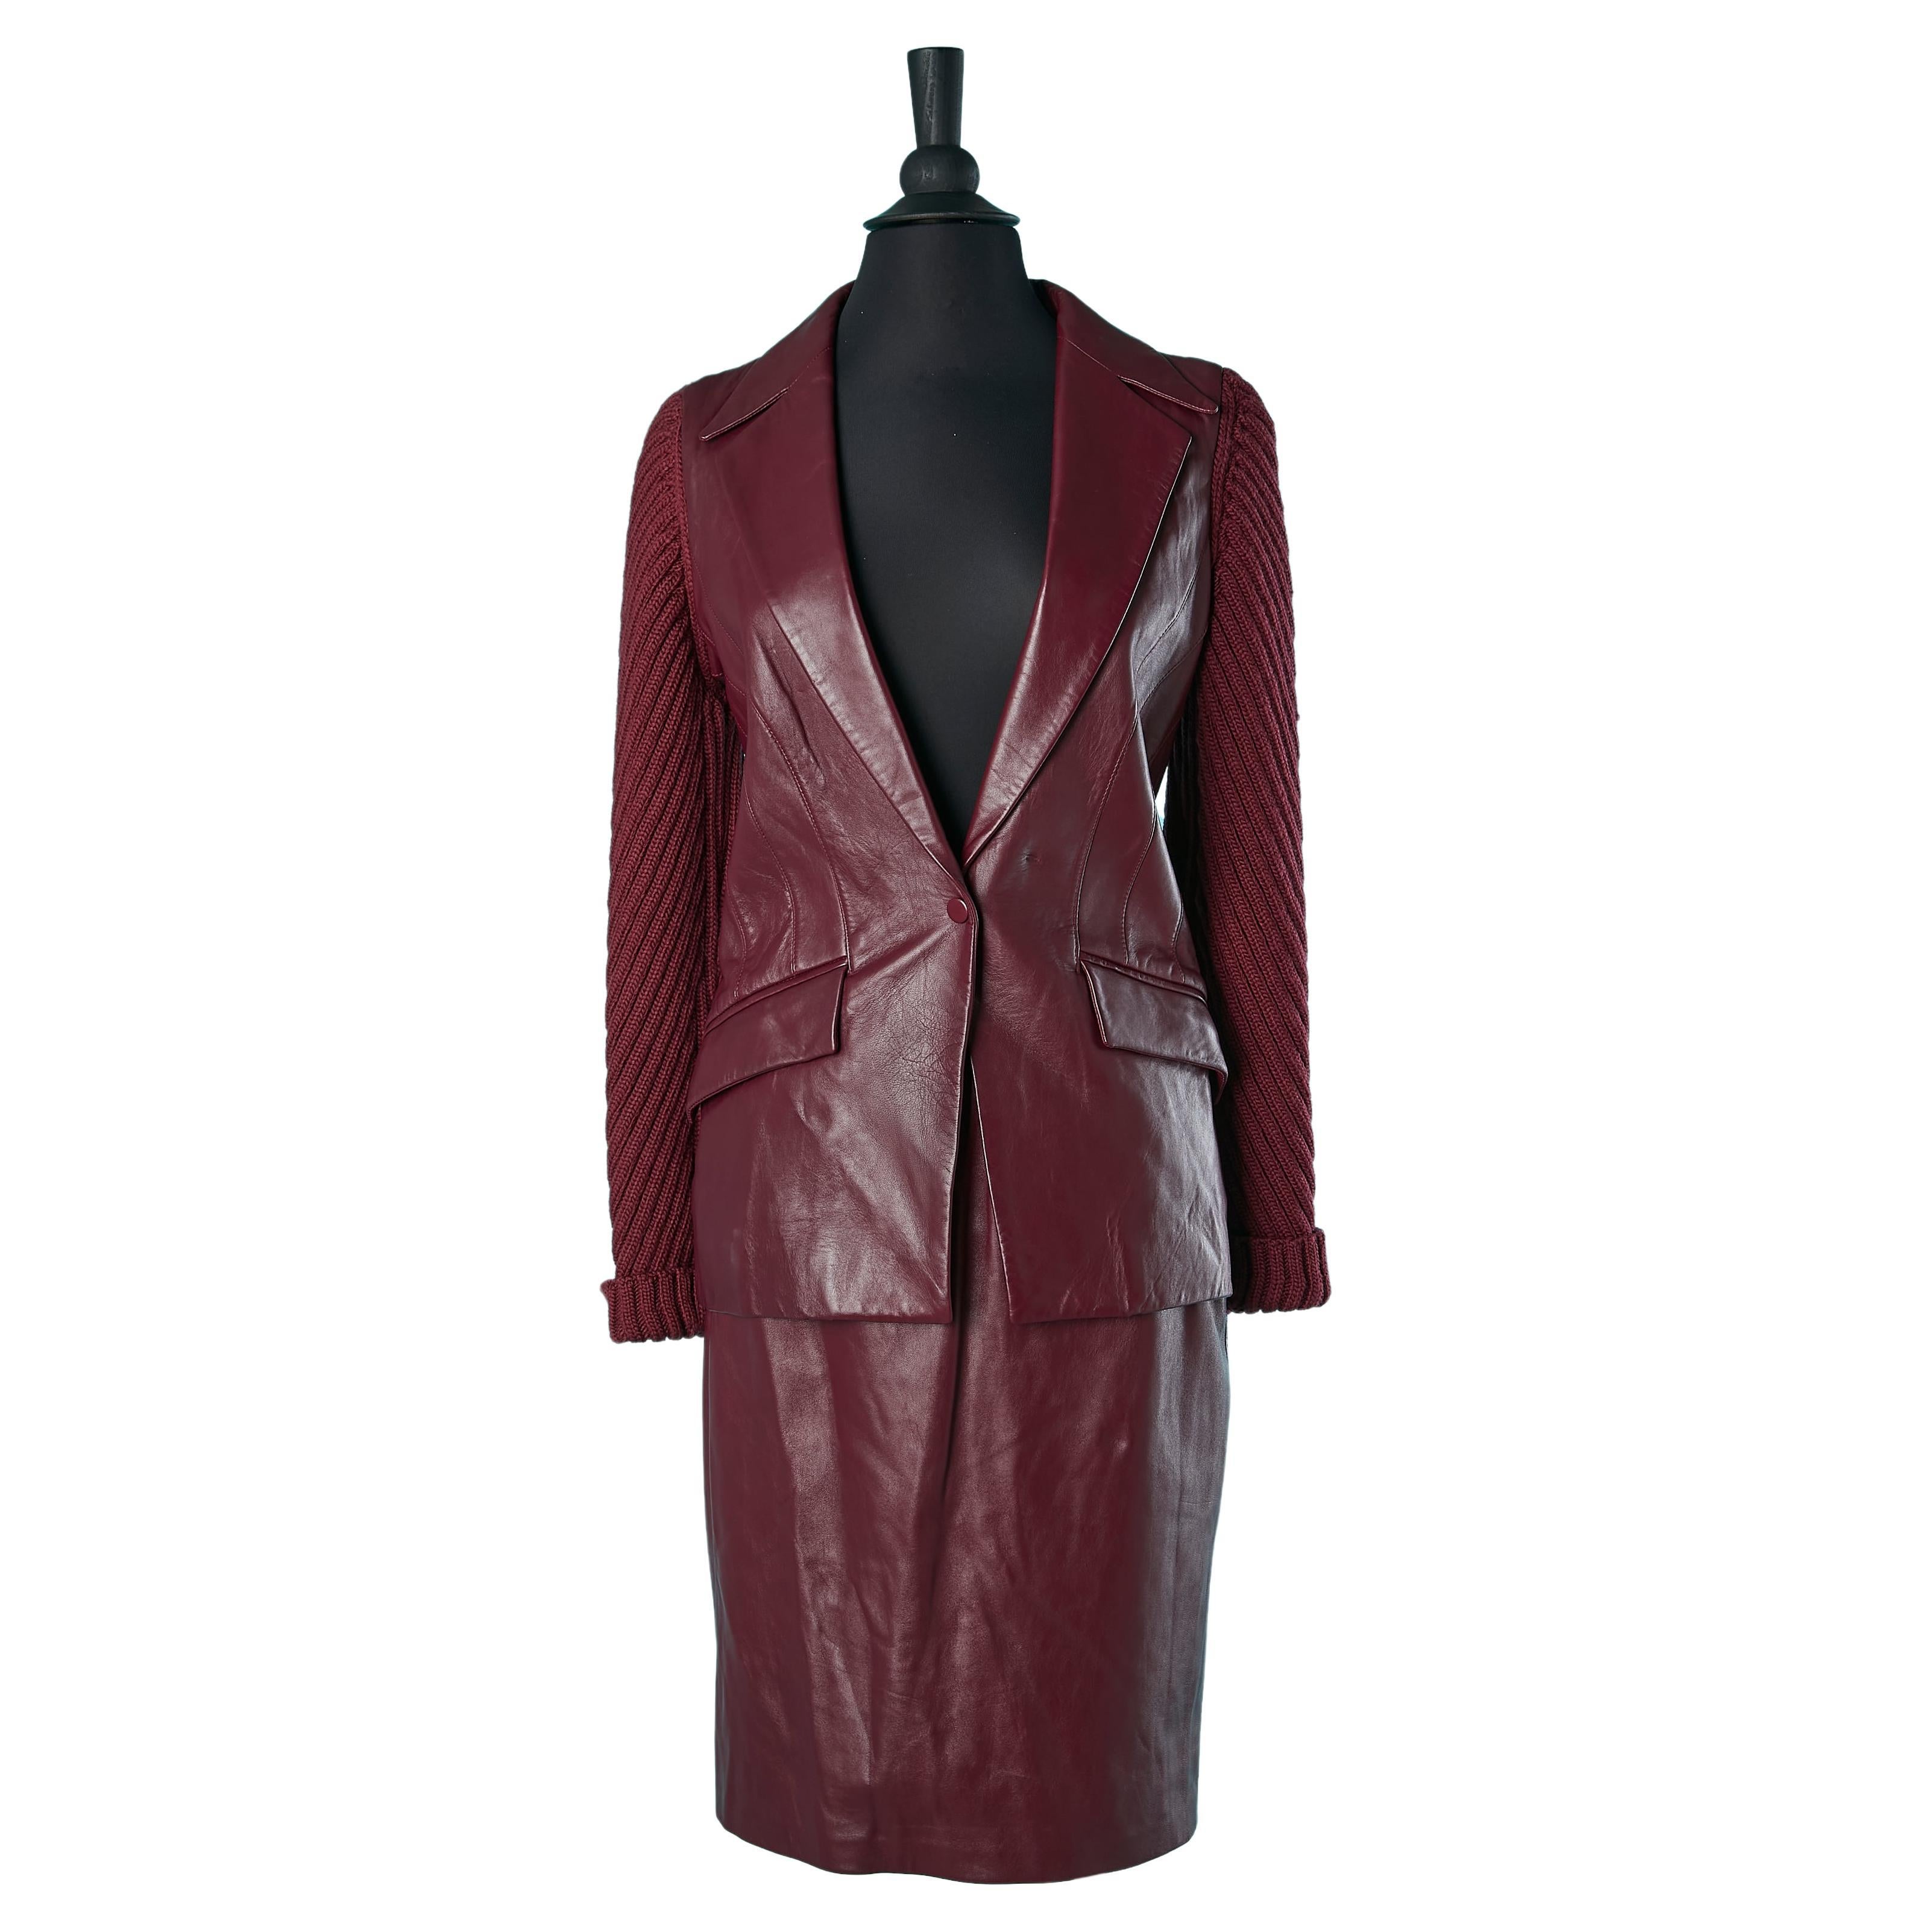 Burgundy skirt-suit in wool knit and leather MUGLER Circa 1990's 